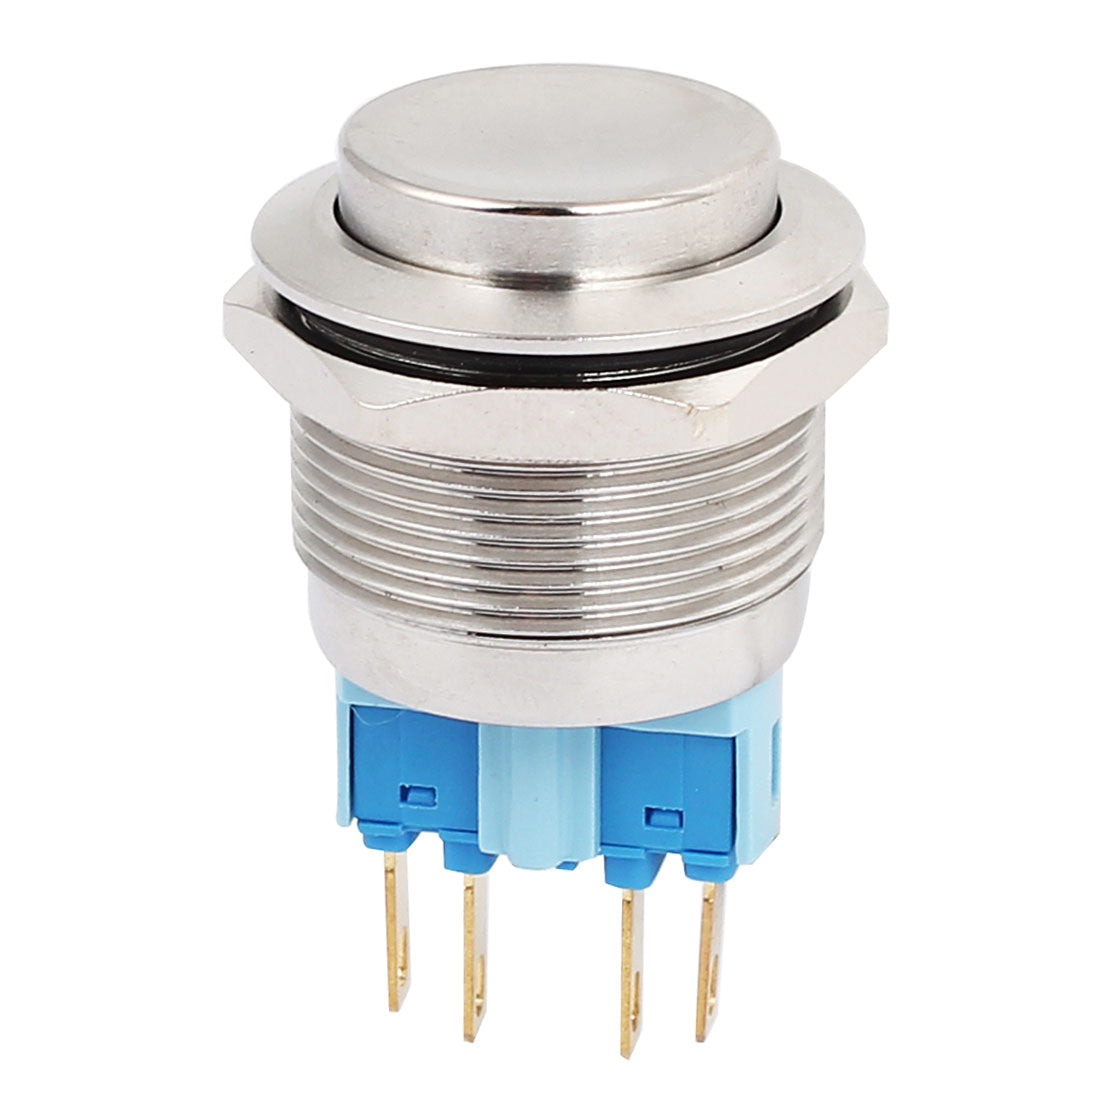 uxcell Uxcell 5A 250VAC 22mm DPST Momentary Metal Pushbutton Switch Raised Head Silver Tone